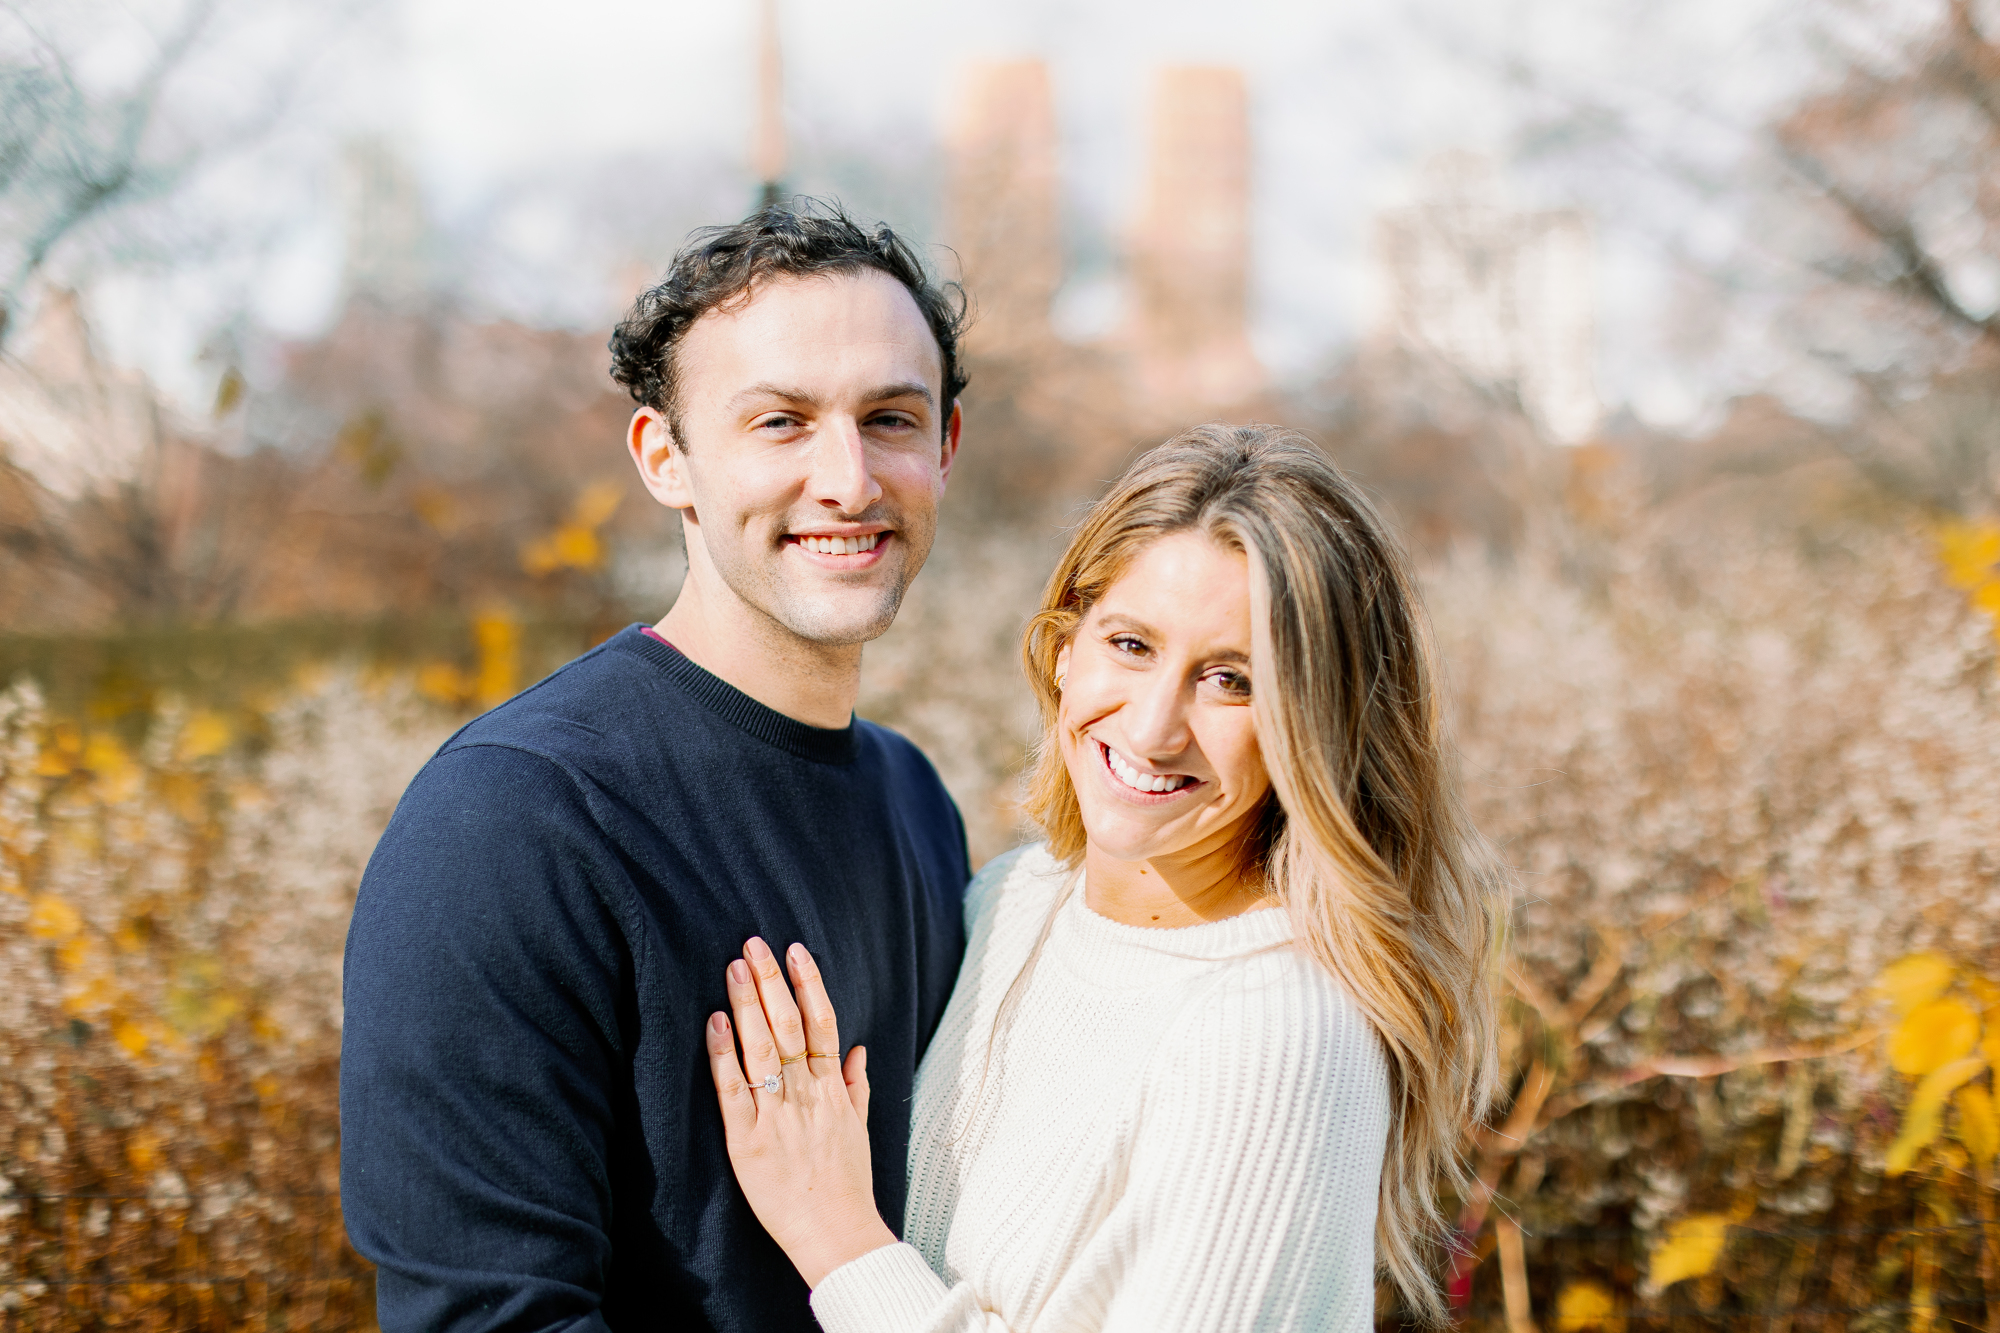 Fall engagement session at Central Park